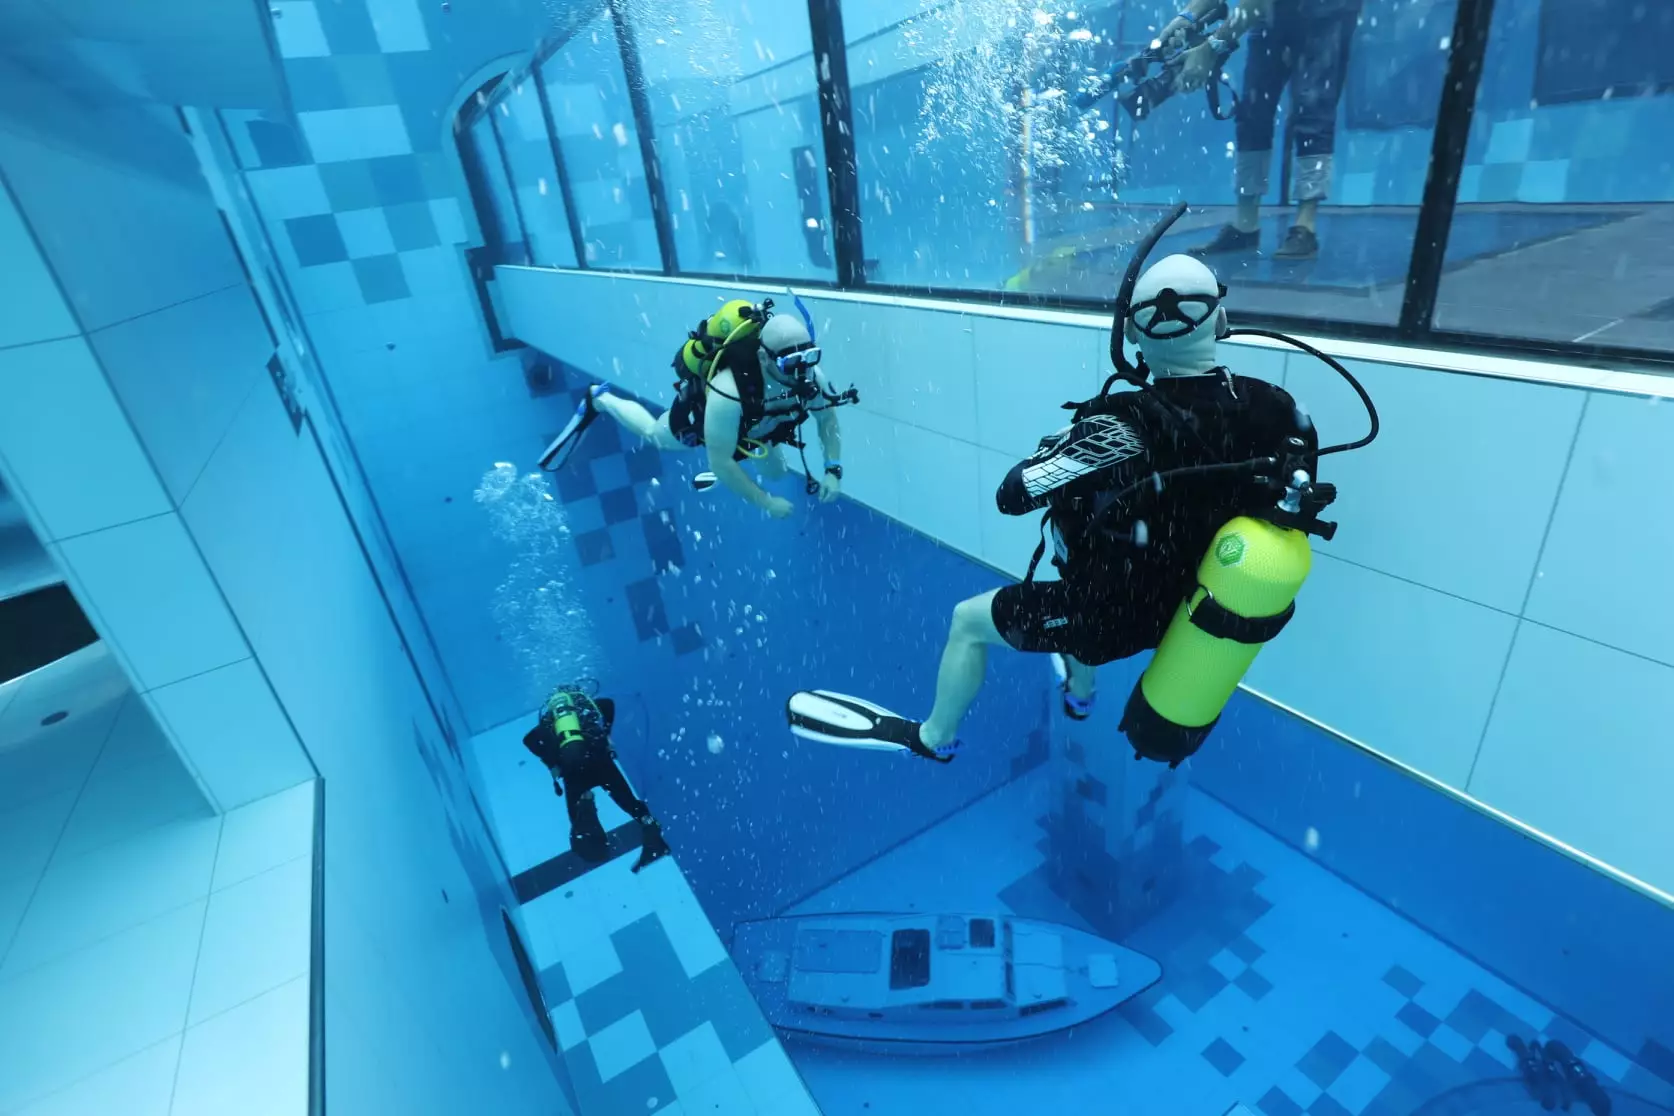 The new centre is the deepest pool in the world.